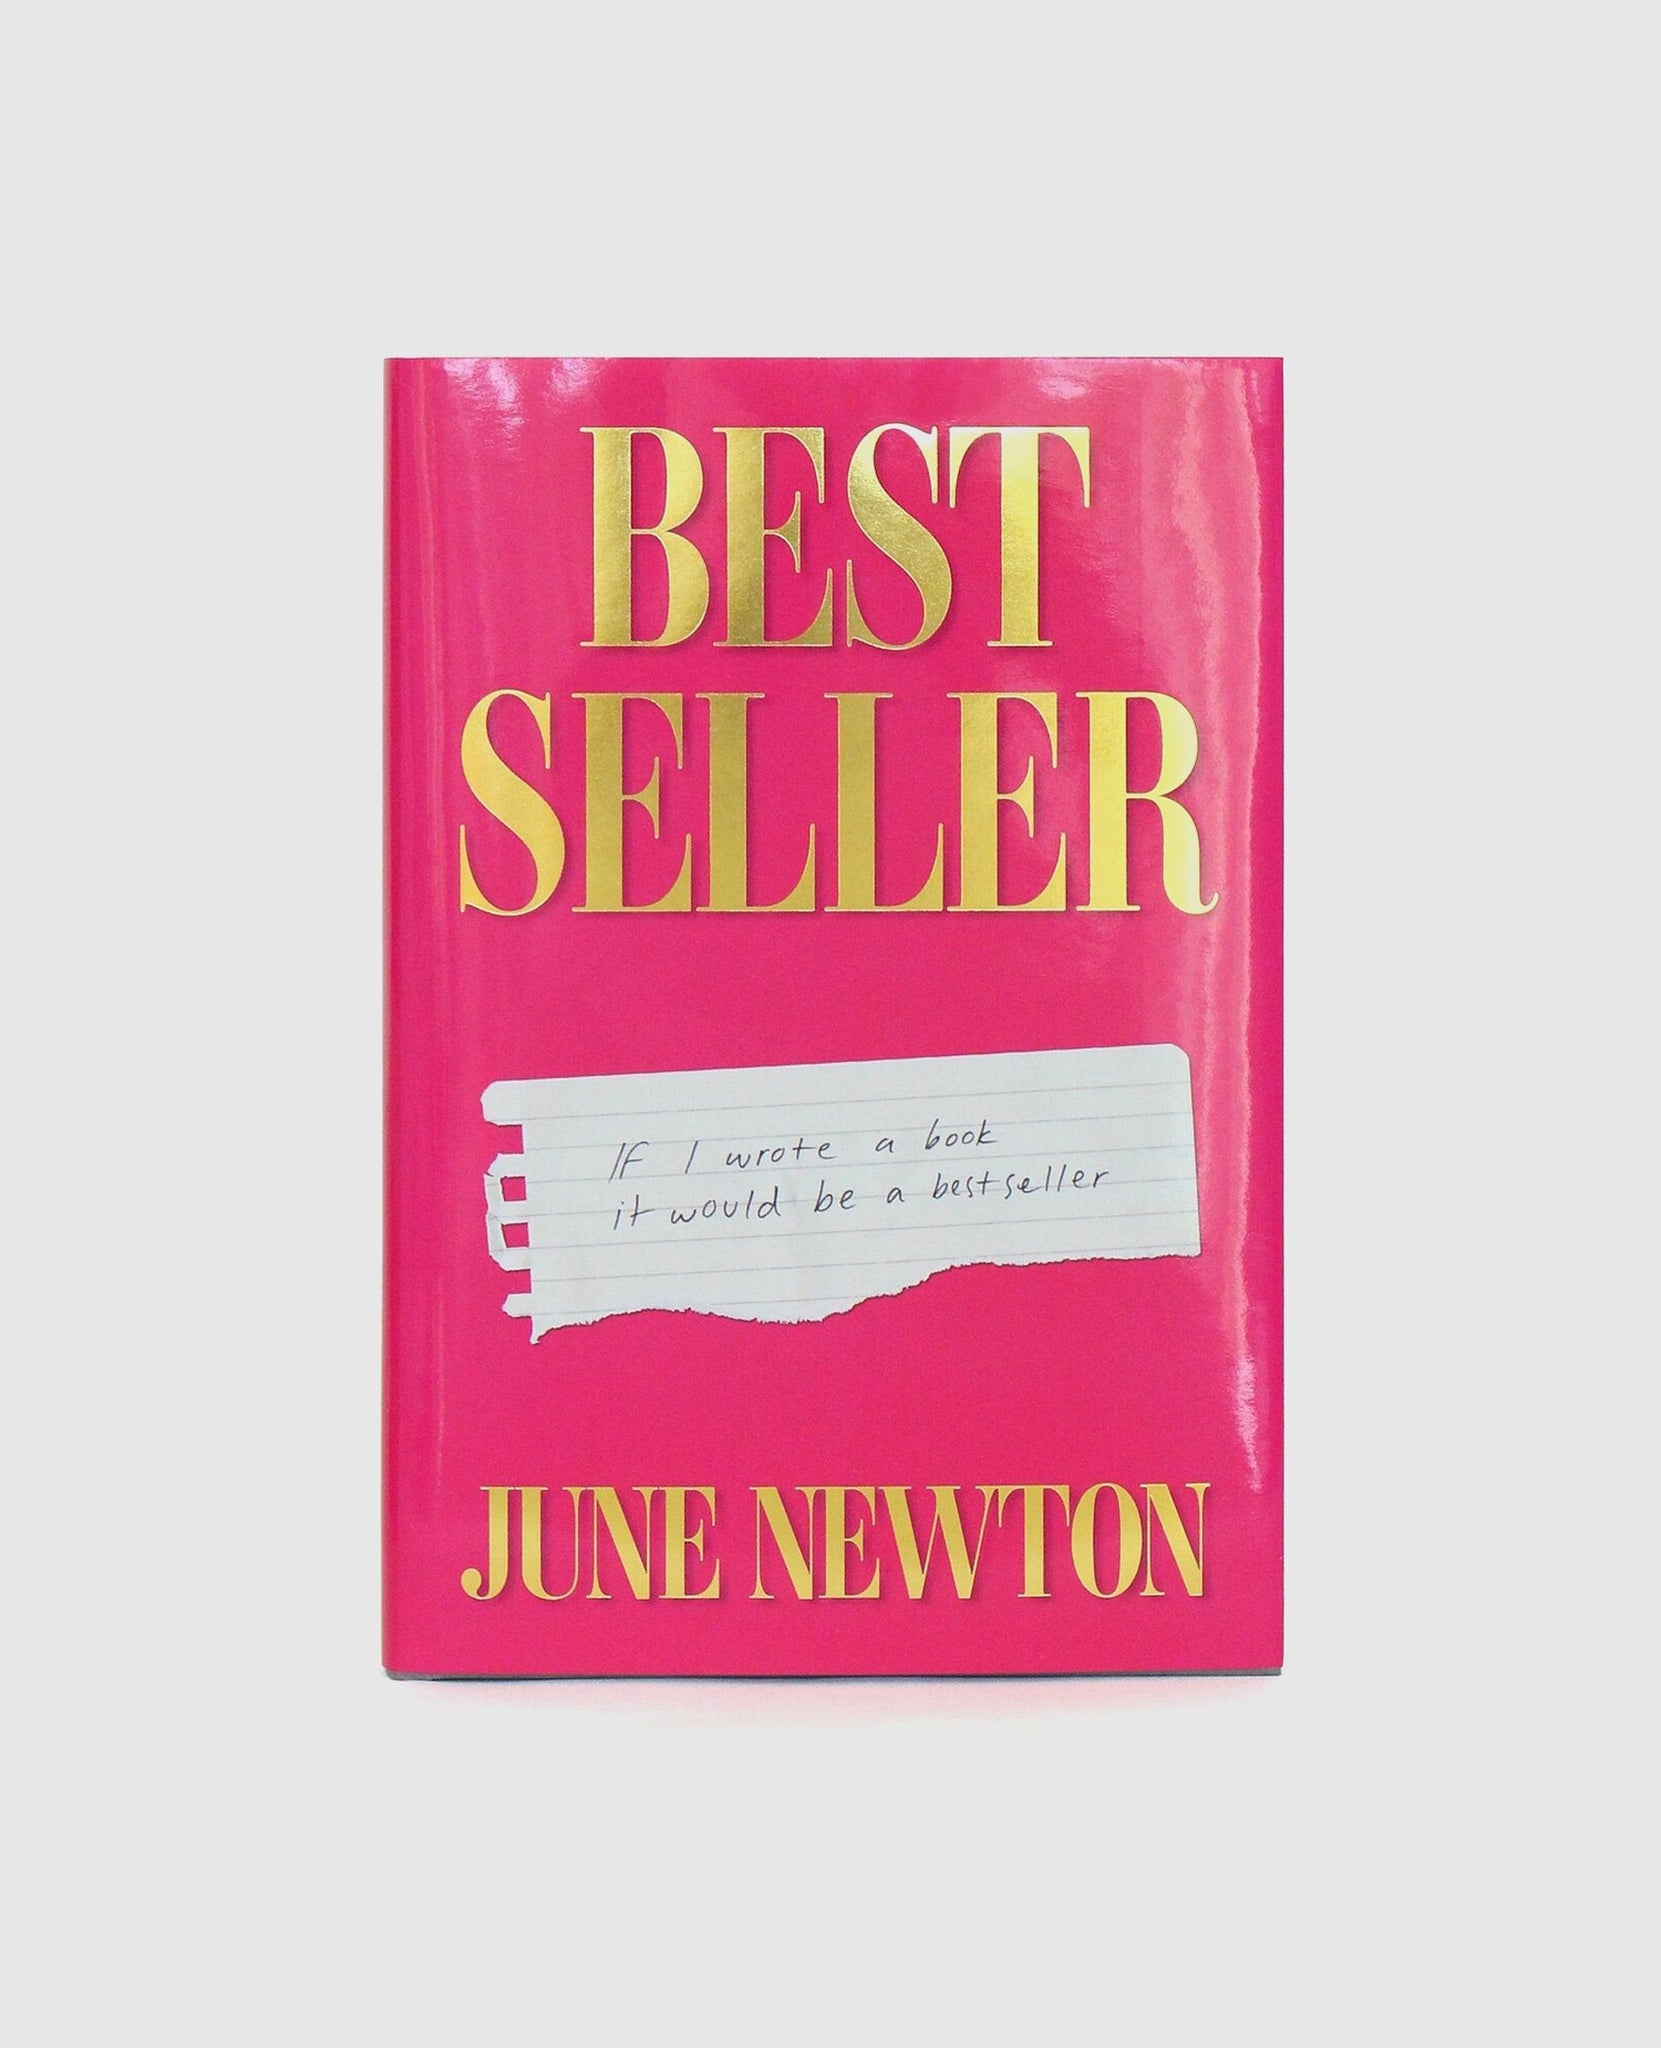 BEST SELLER June Newton by David Owen (the D of IDEA) - {{ collection.title }} - Chinatown Country Club 